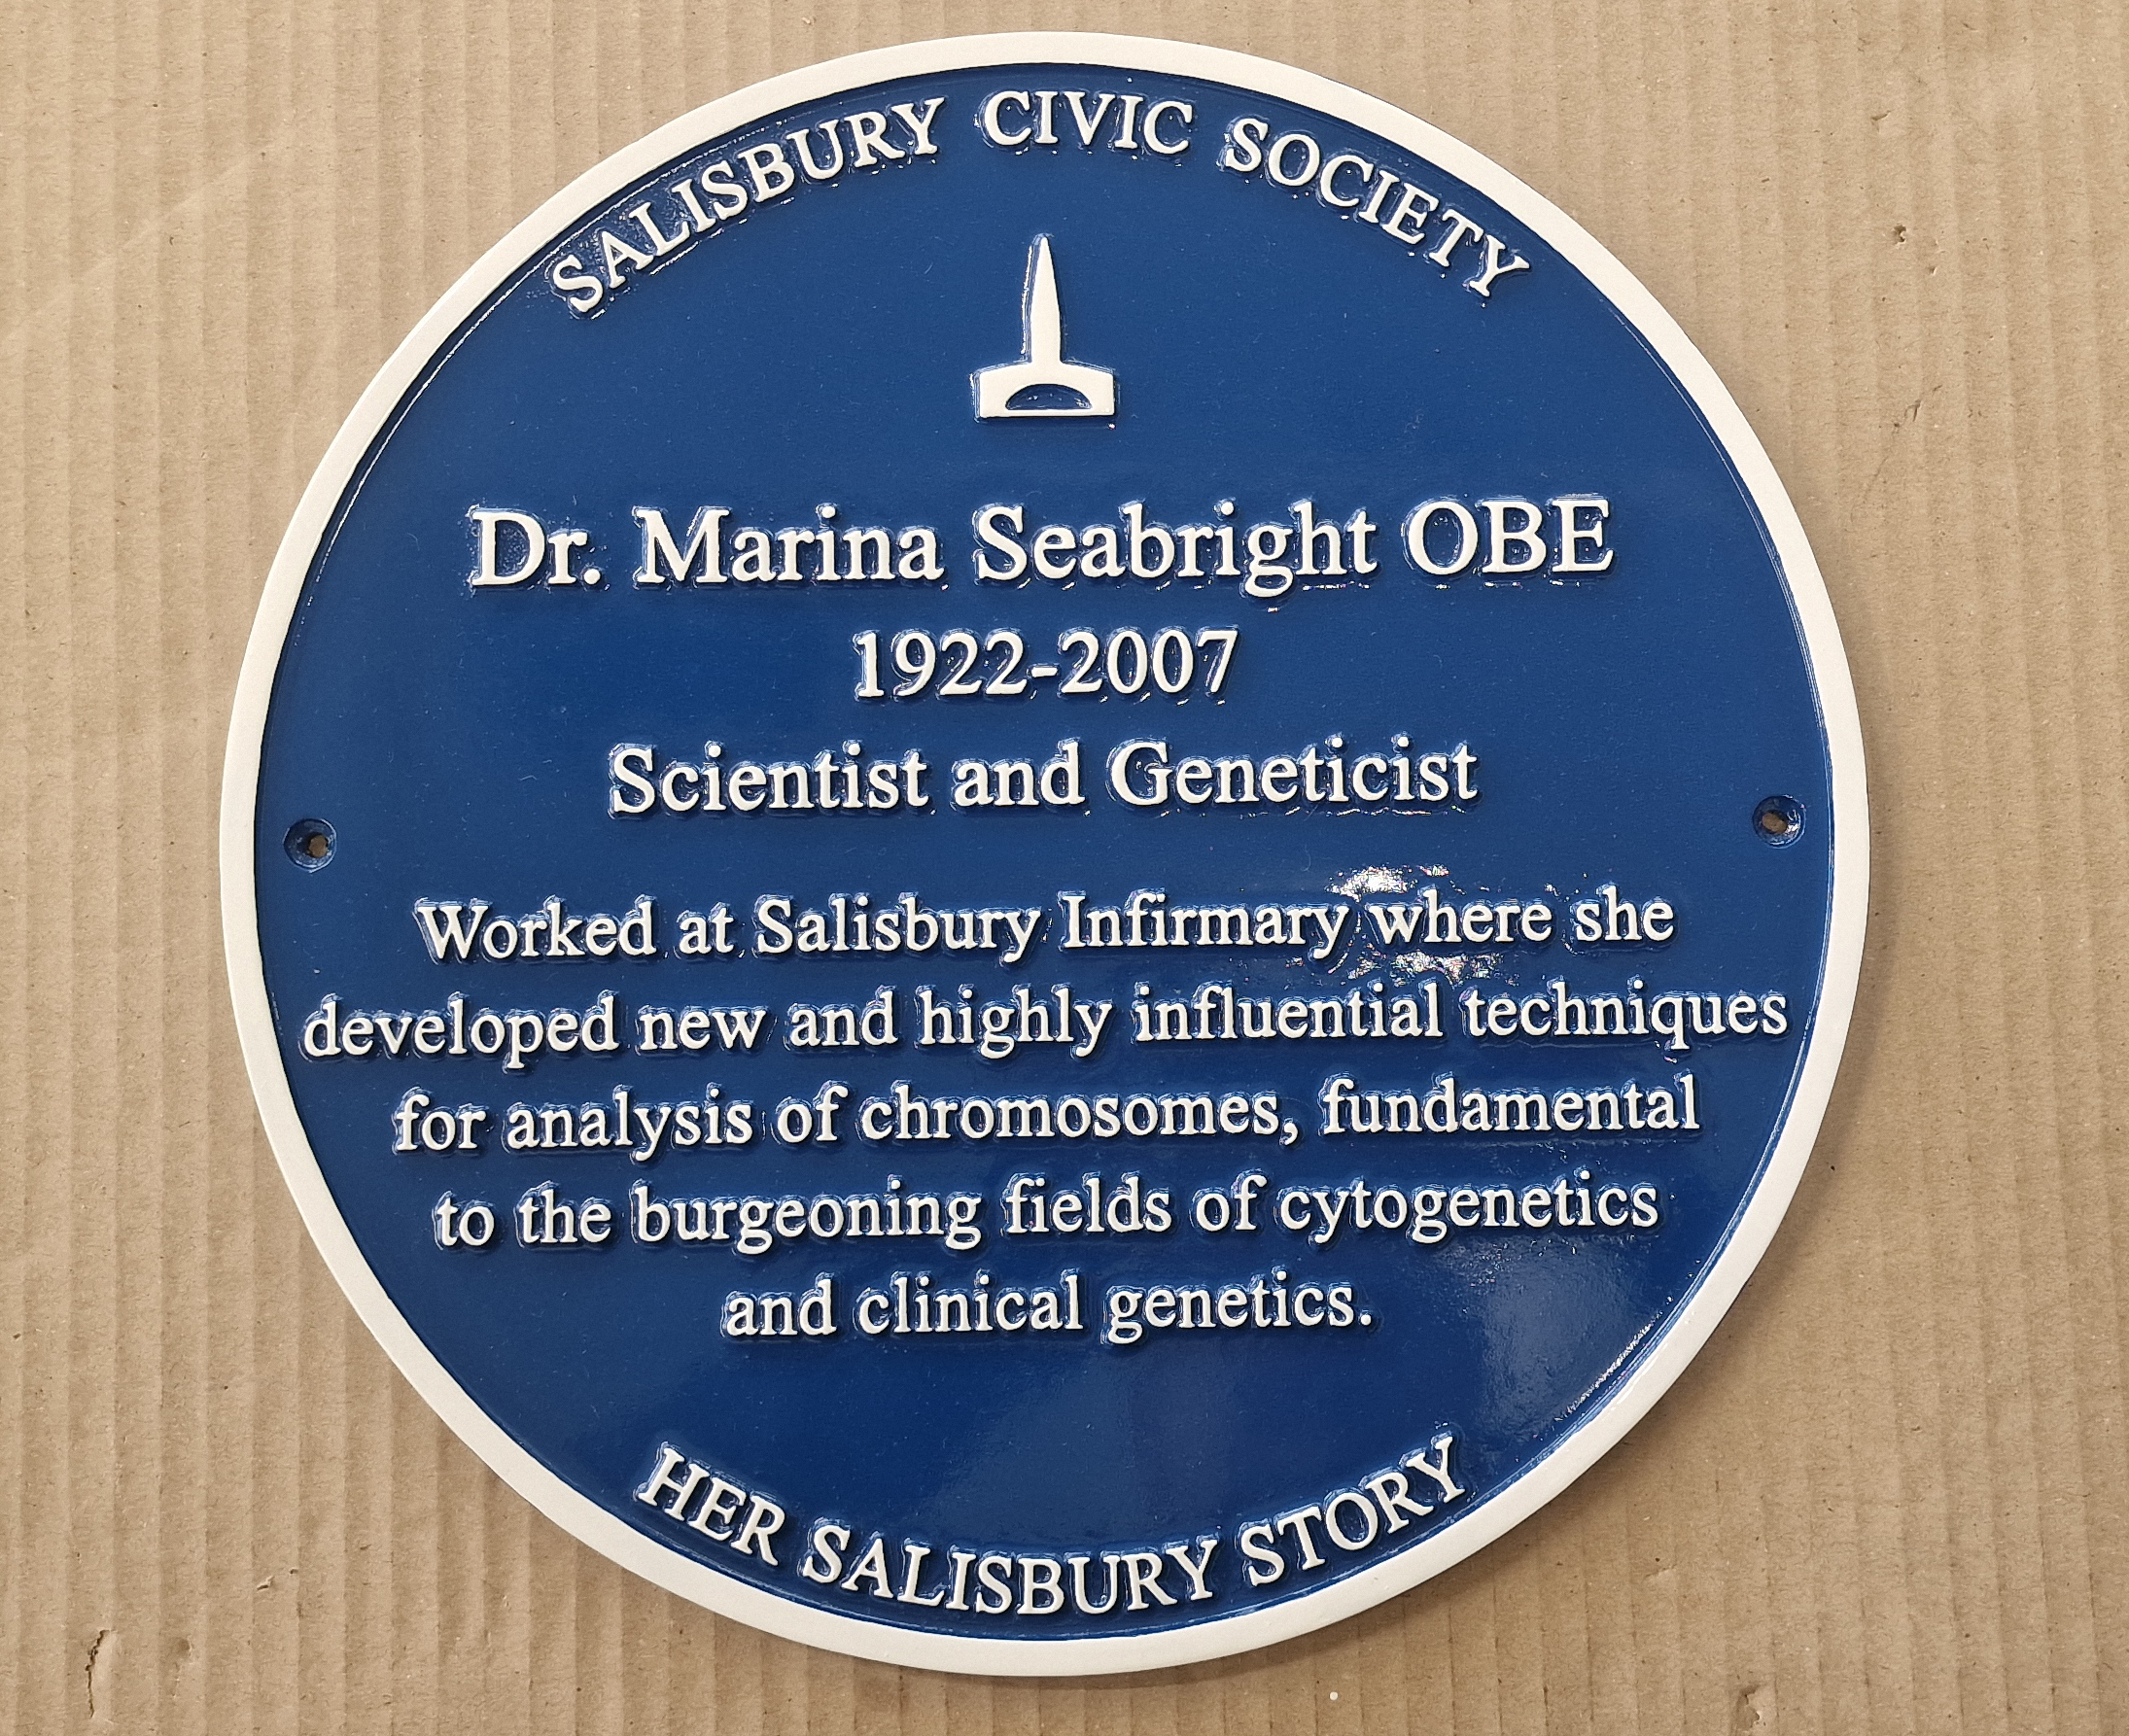 The plaque will recognise Dr Seabright's pioneering work